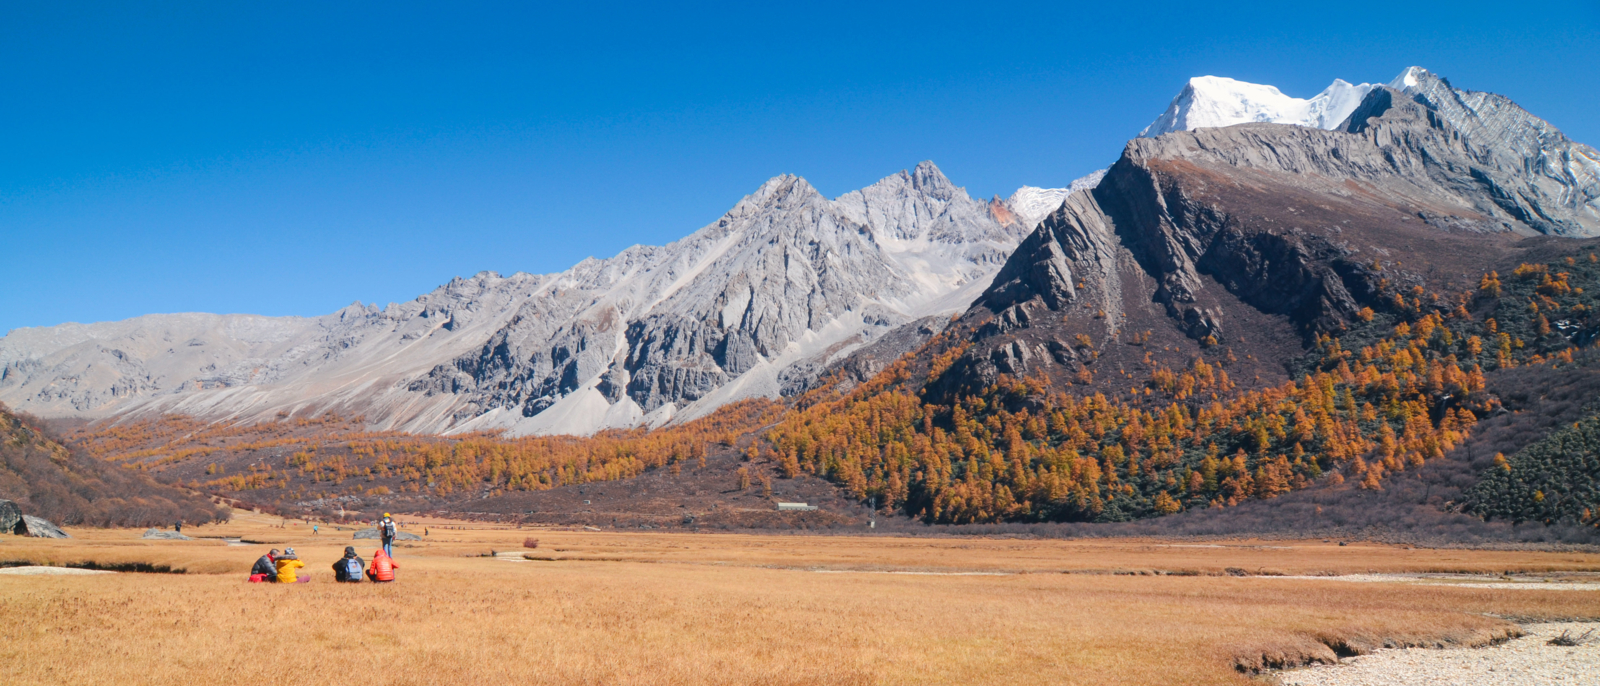 Colorful in autumn forest and snow mountain at Yading nature reserve, The last Shangri la, Daocheng-Yading, Sichuan, China